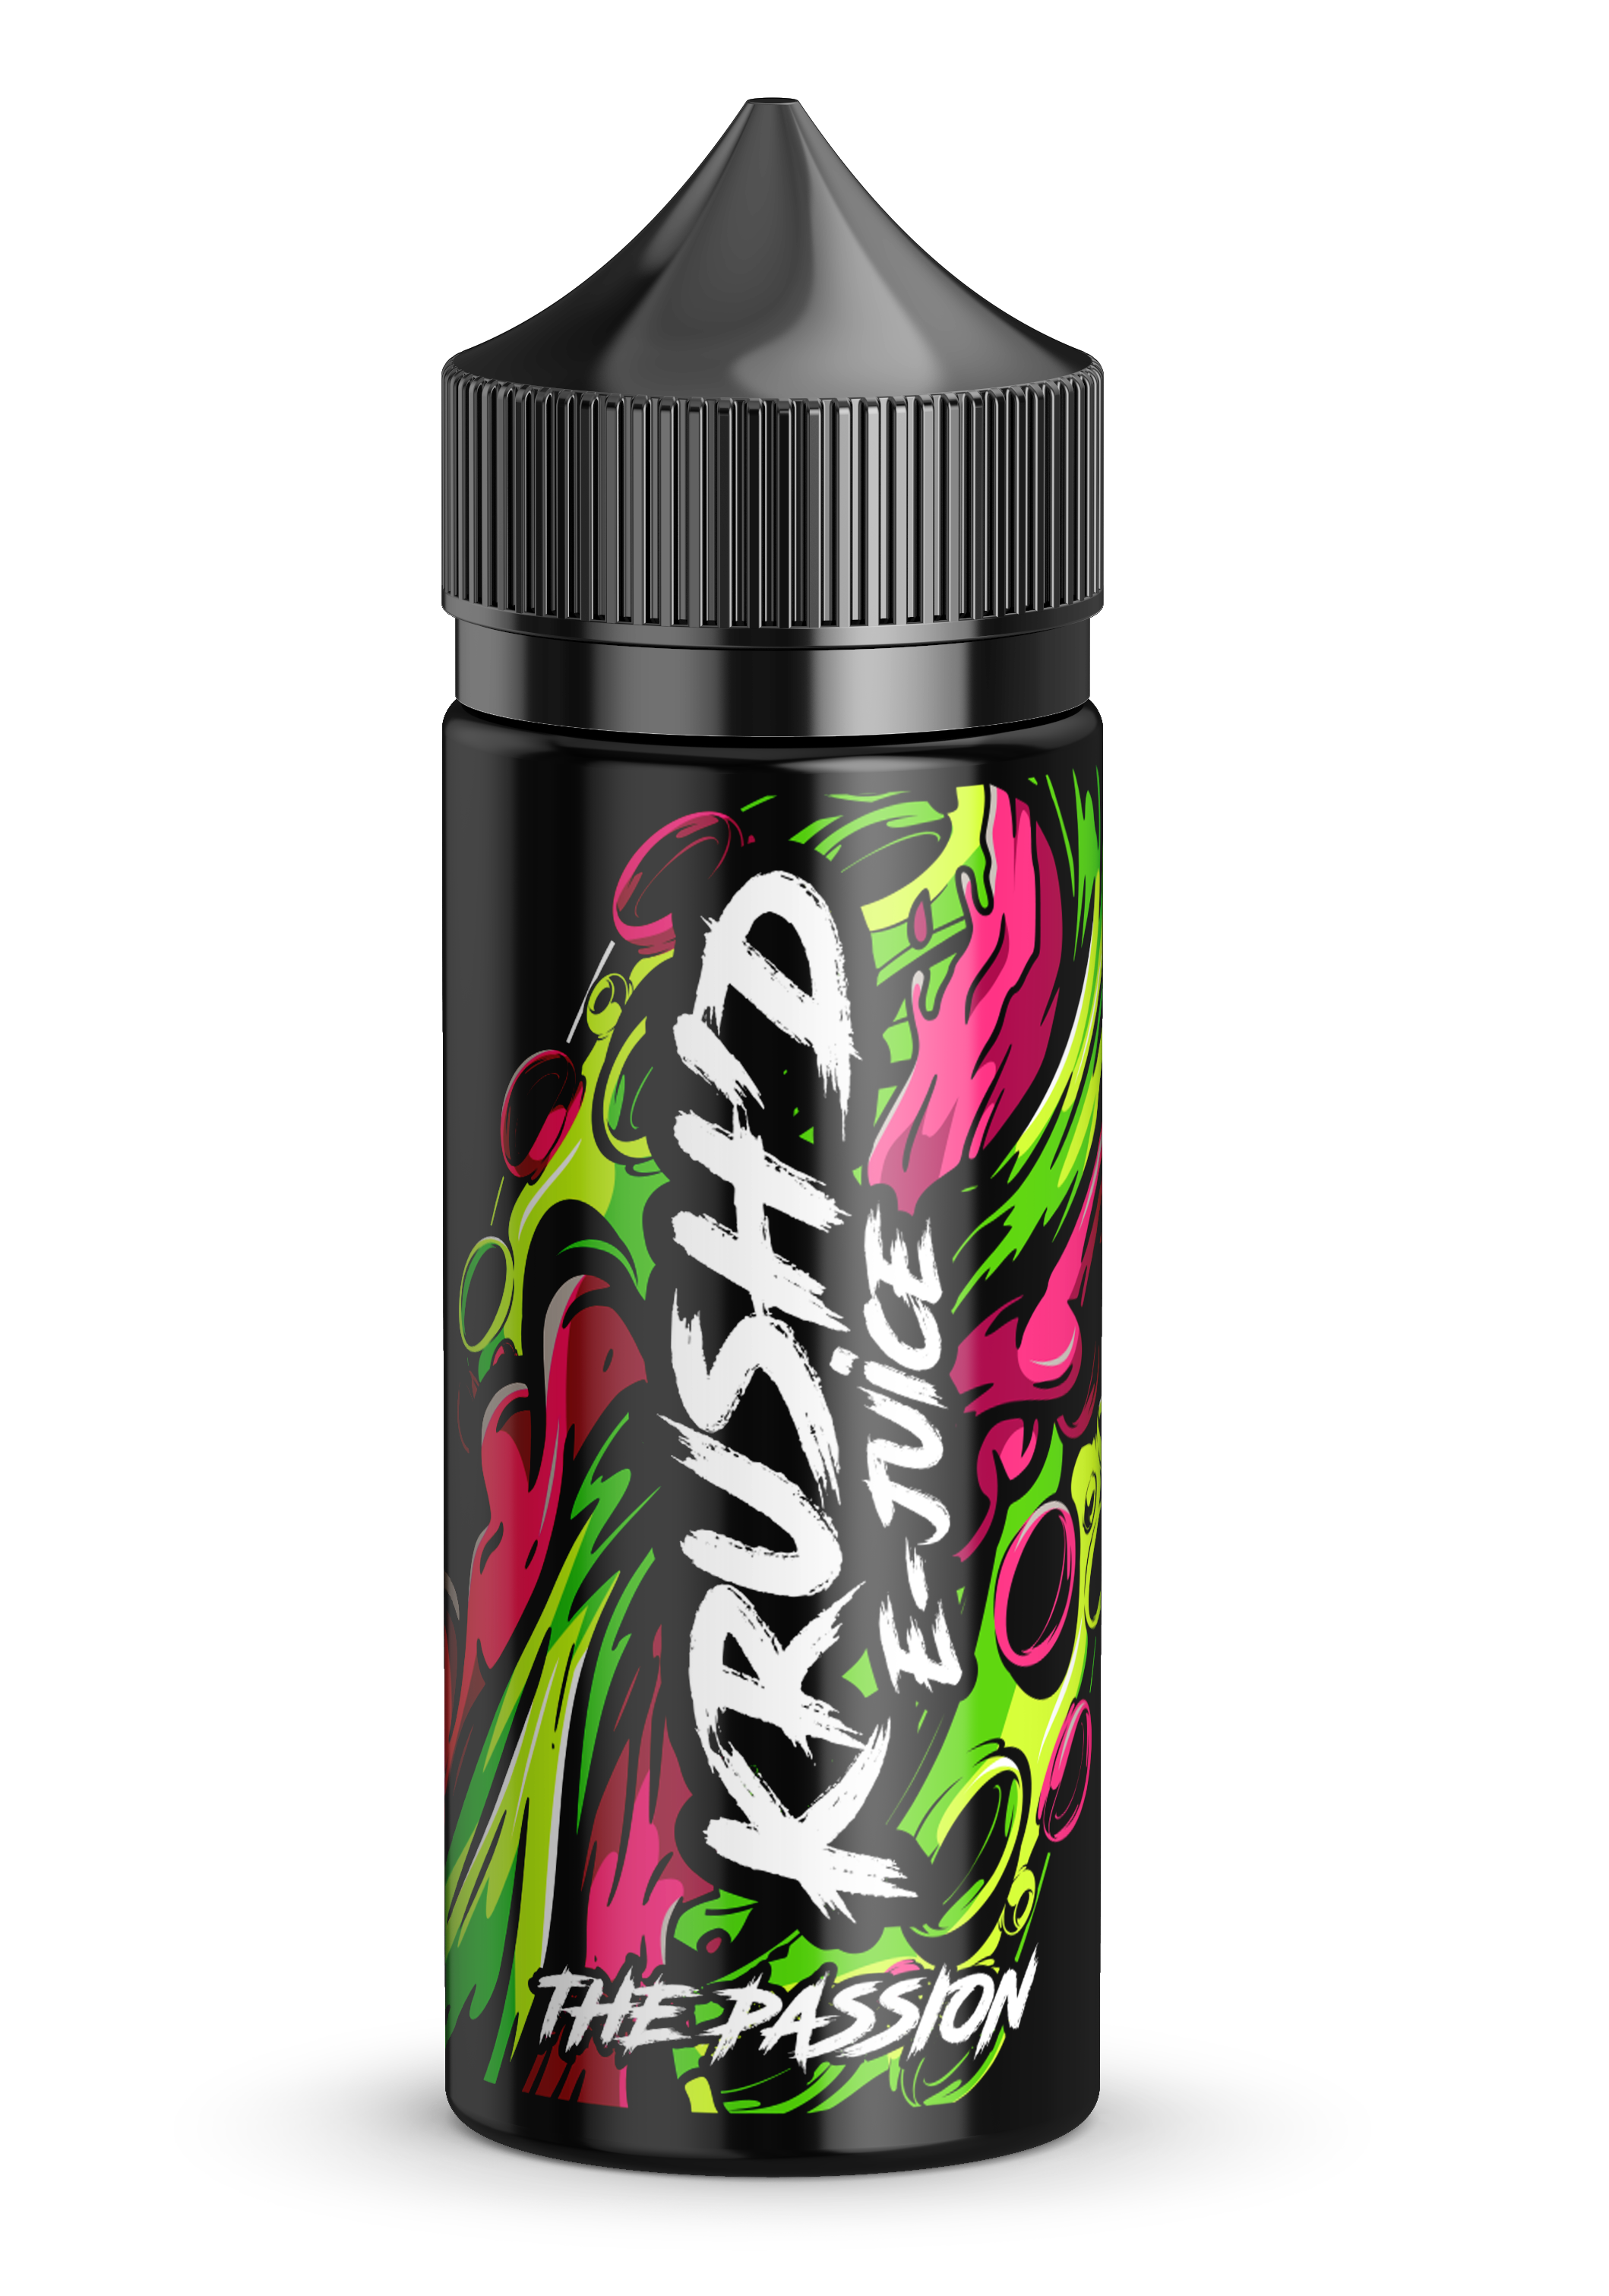 The Passion by Krush'd 100ml